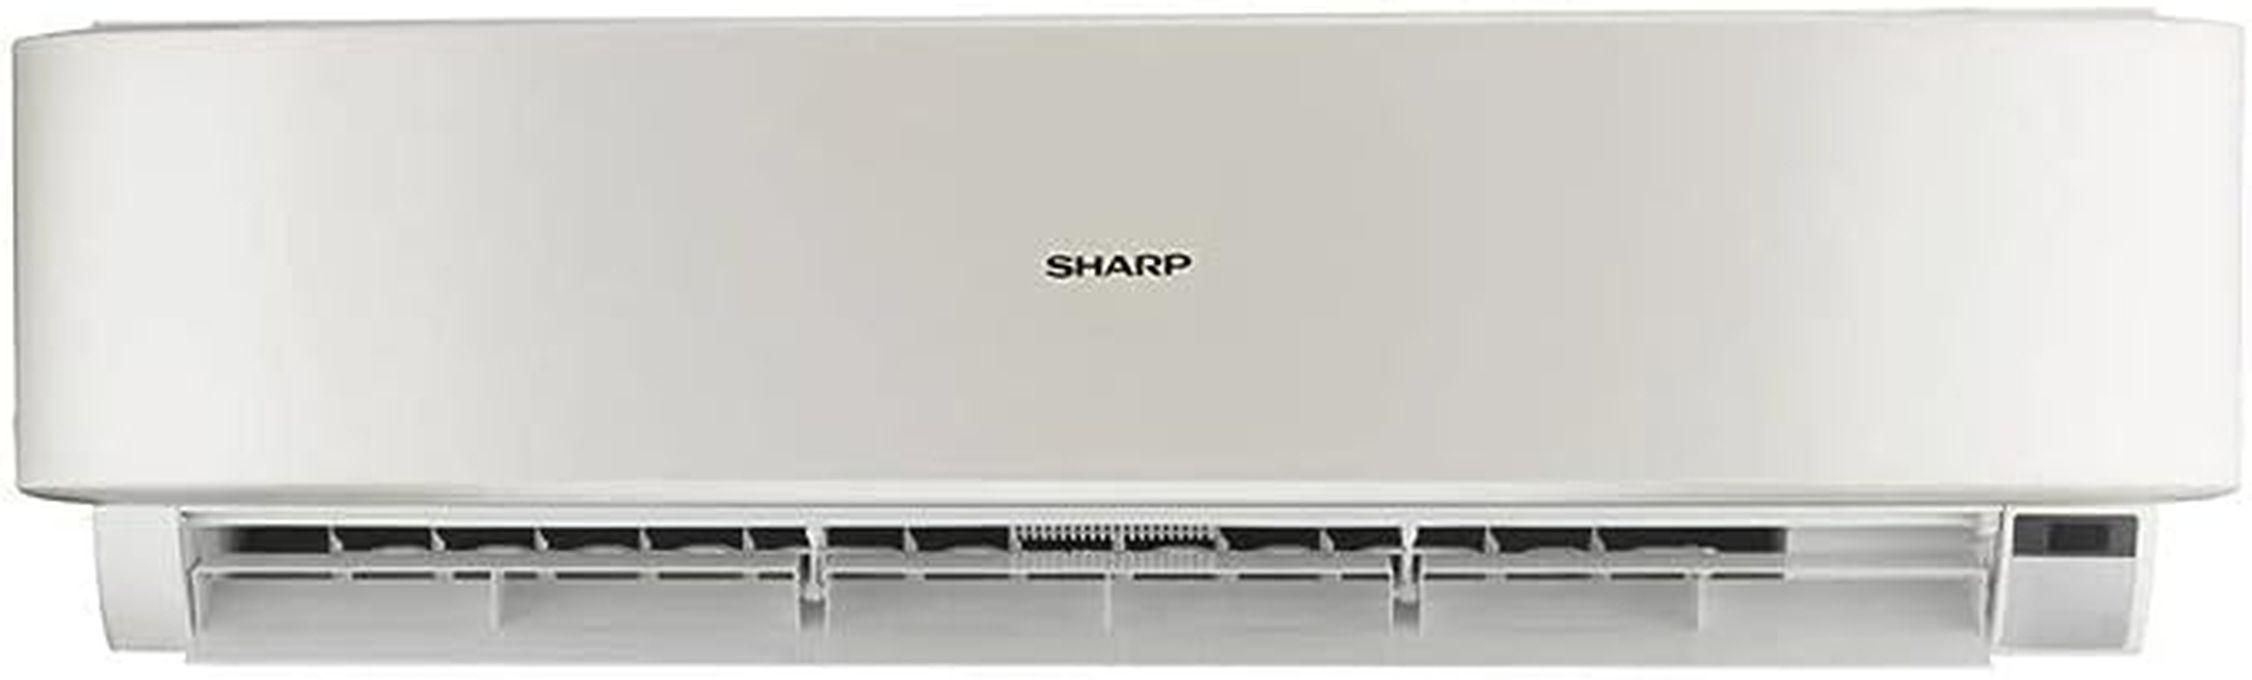 Sharp Split Air Conditioner 3 HP Cool, Turbo, White AH-A24YSE